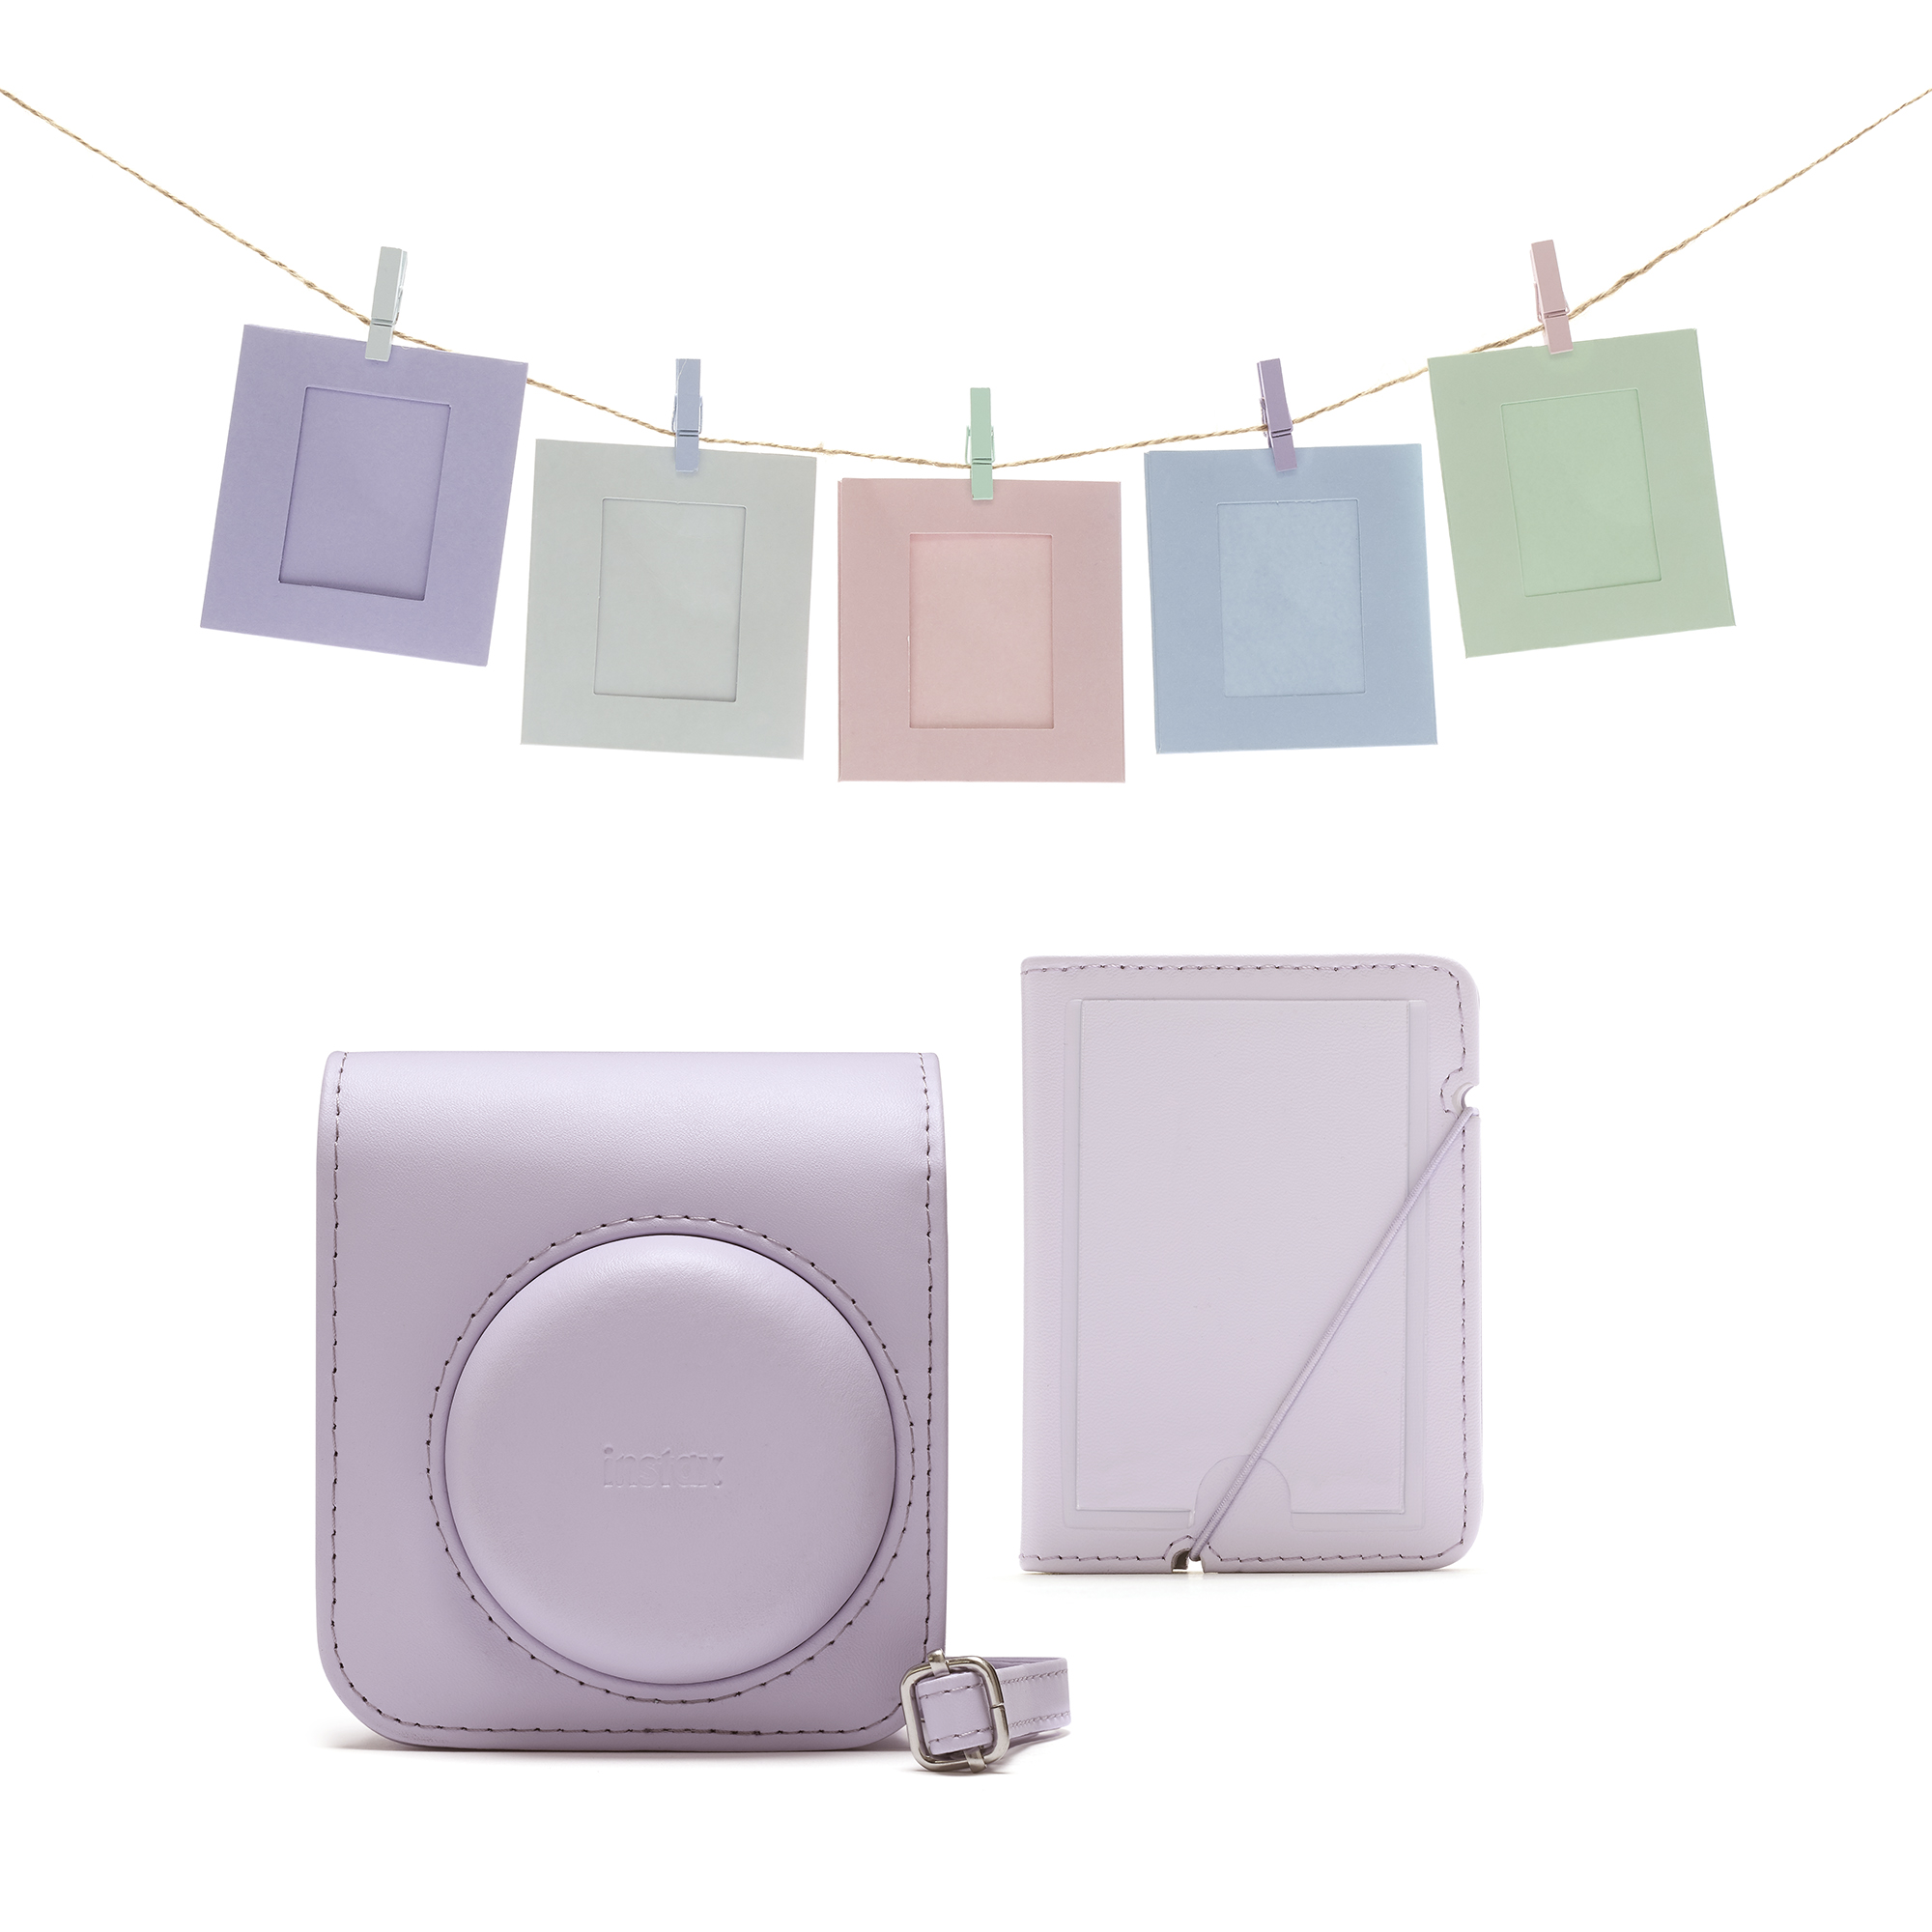 70100157490 FUJI Instax Mini 12 Accessory Kit with Case, Photo Album, Hanging Cards & Pegs - Lilac Purple